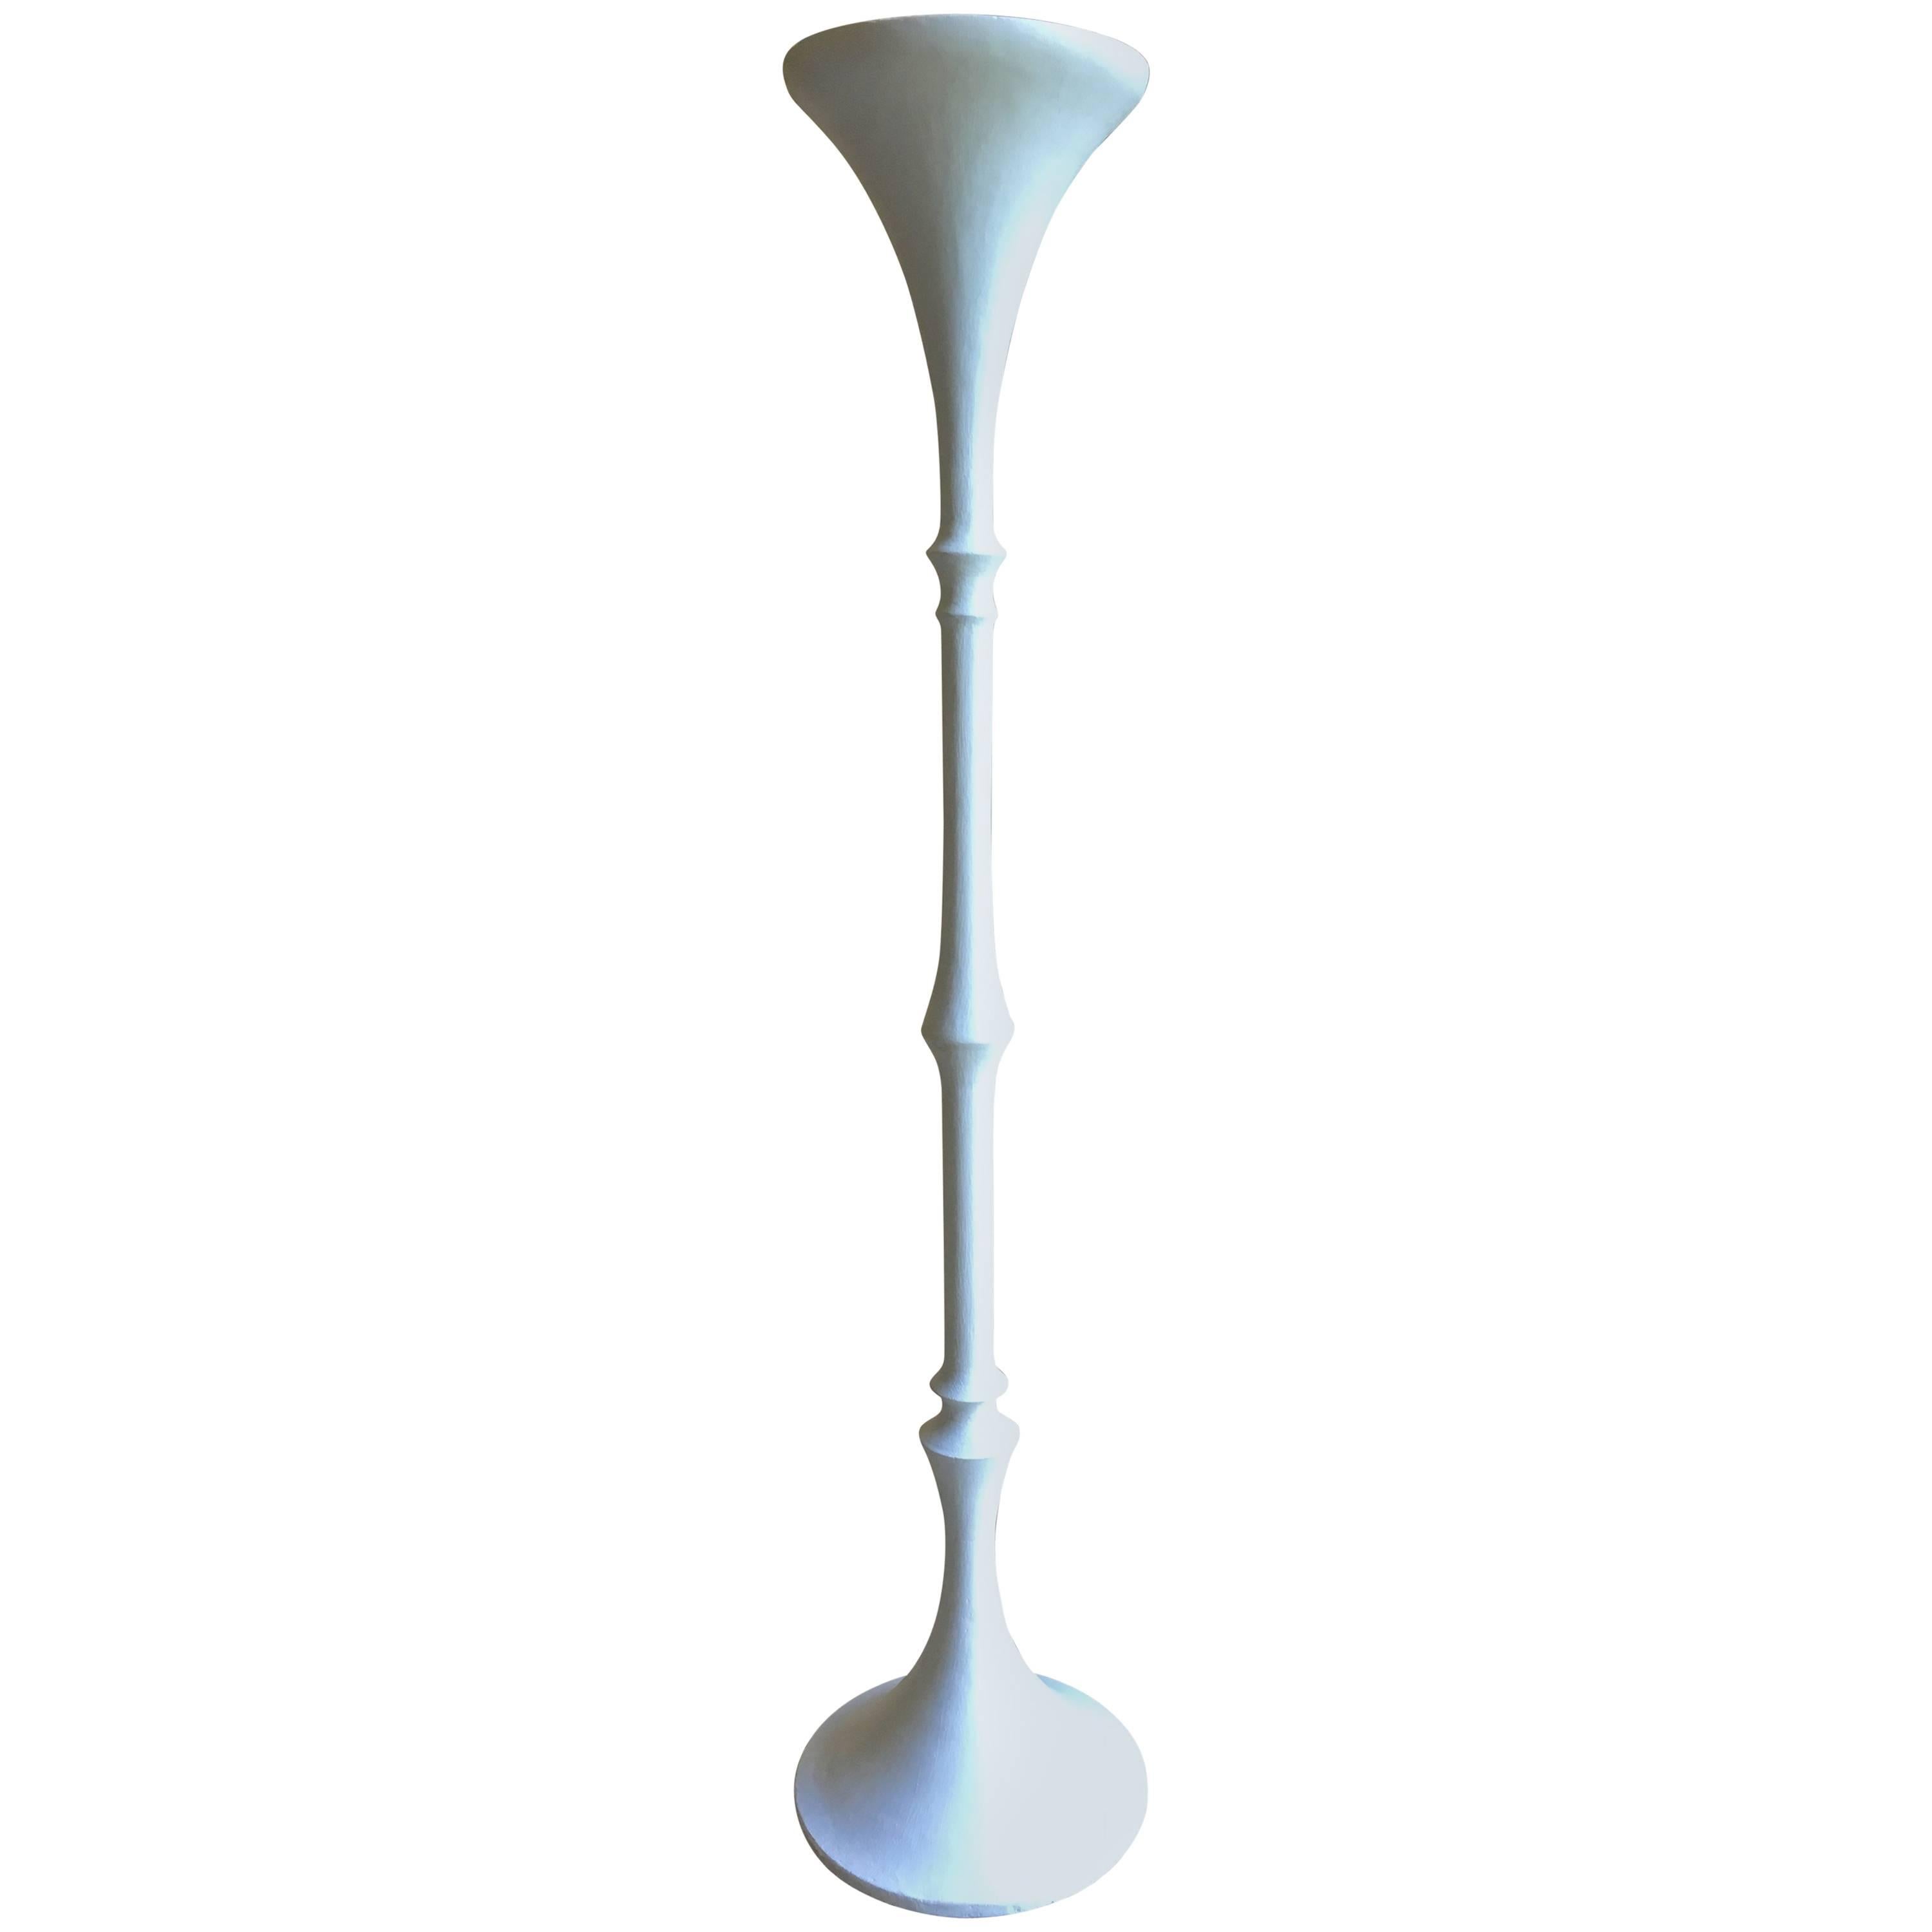 French Plaster Torchiere Floor Lamp, Style of Giacometti, circa 1950